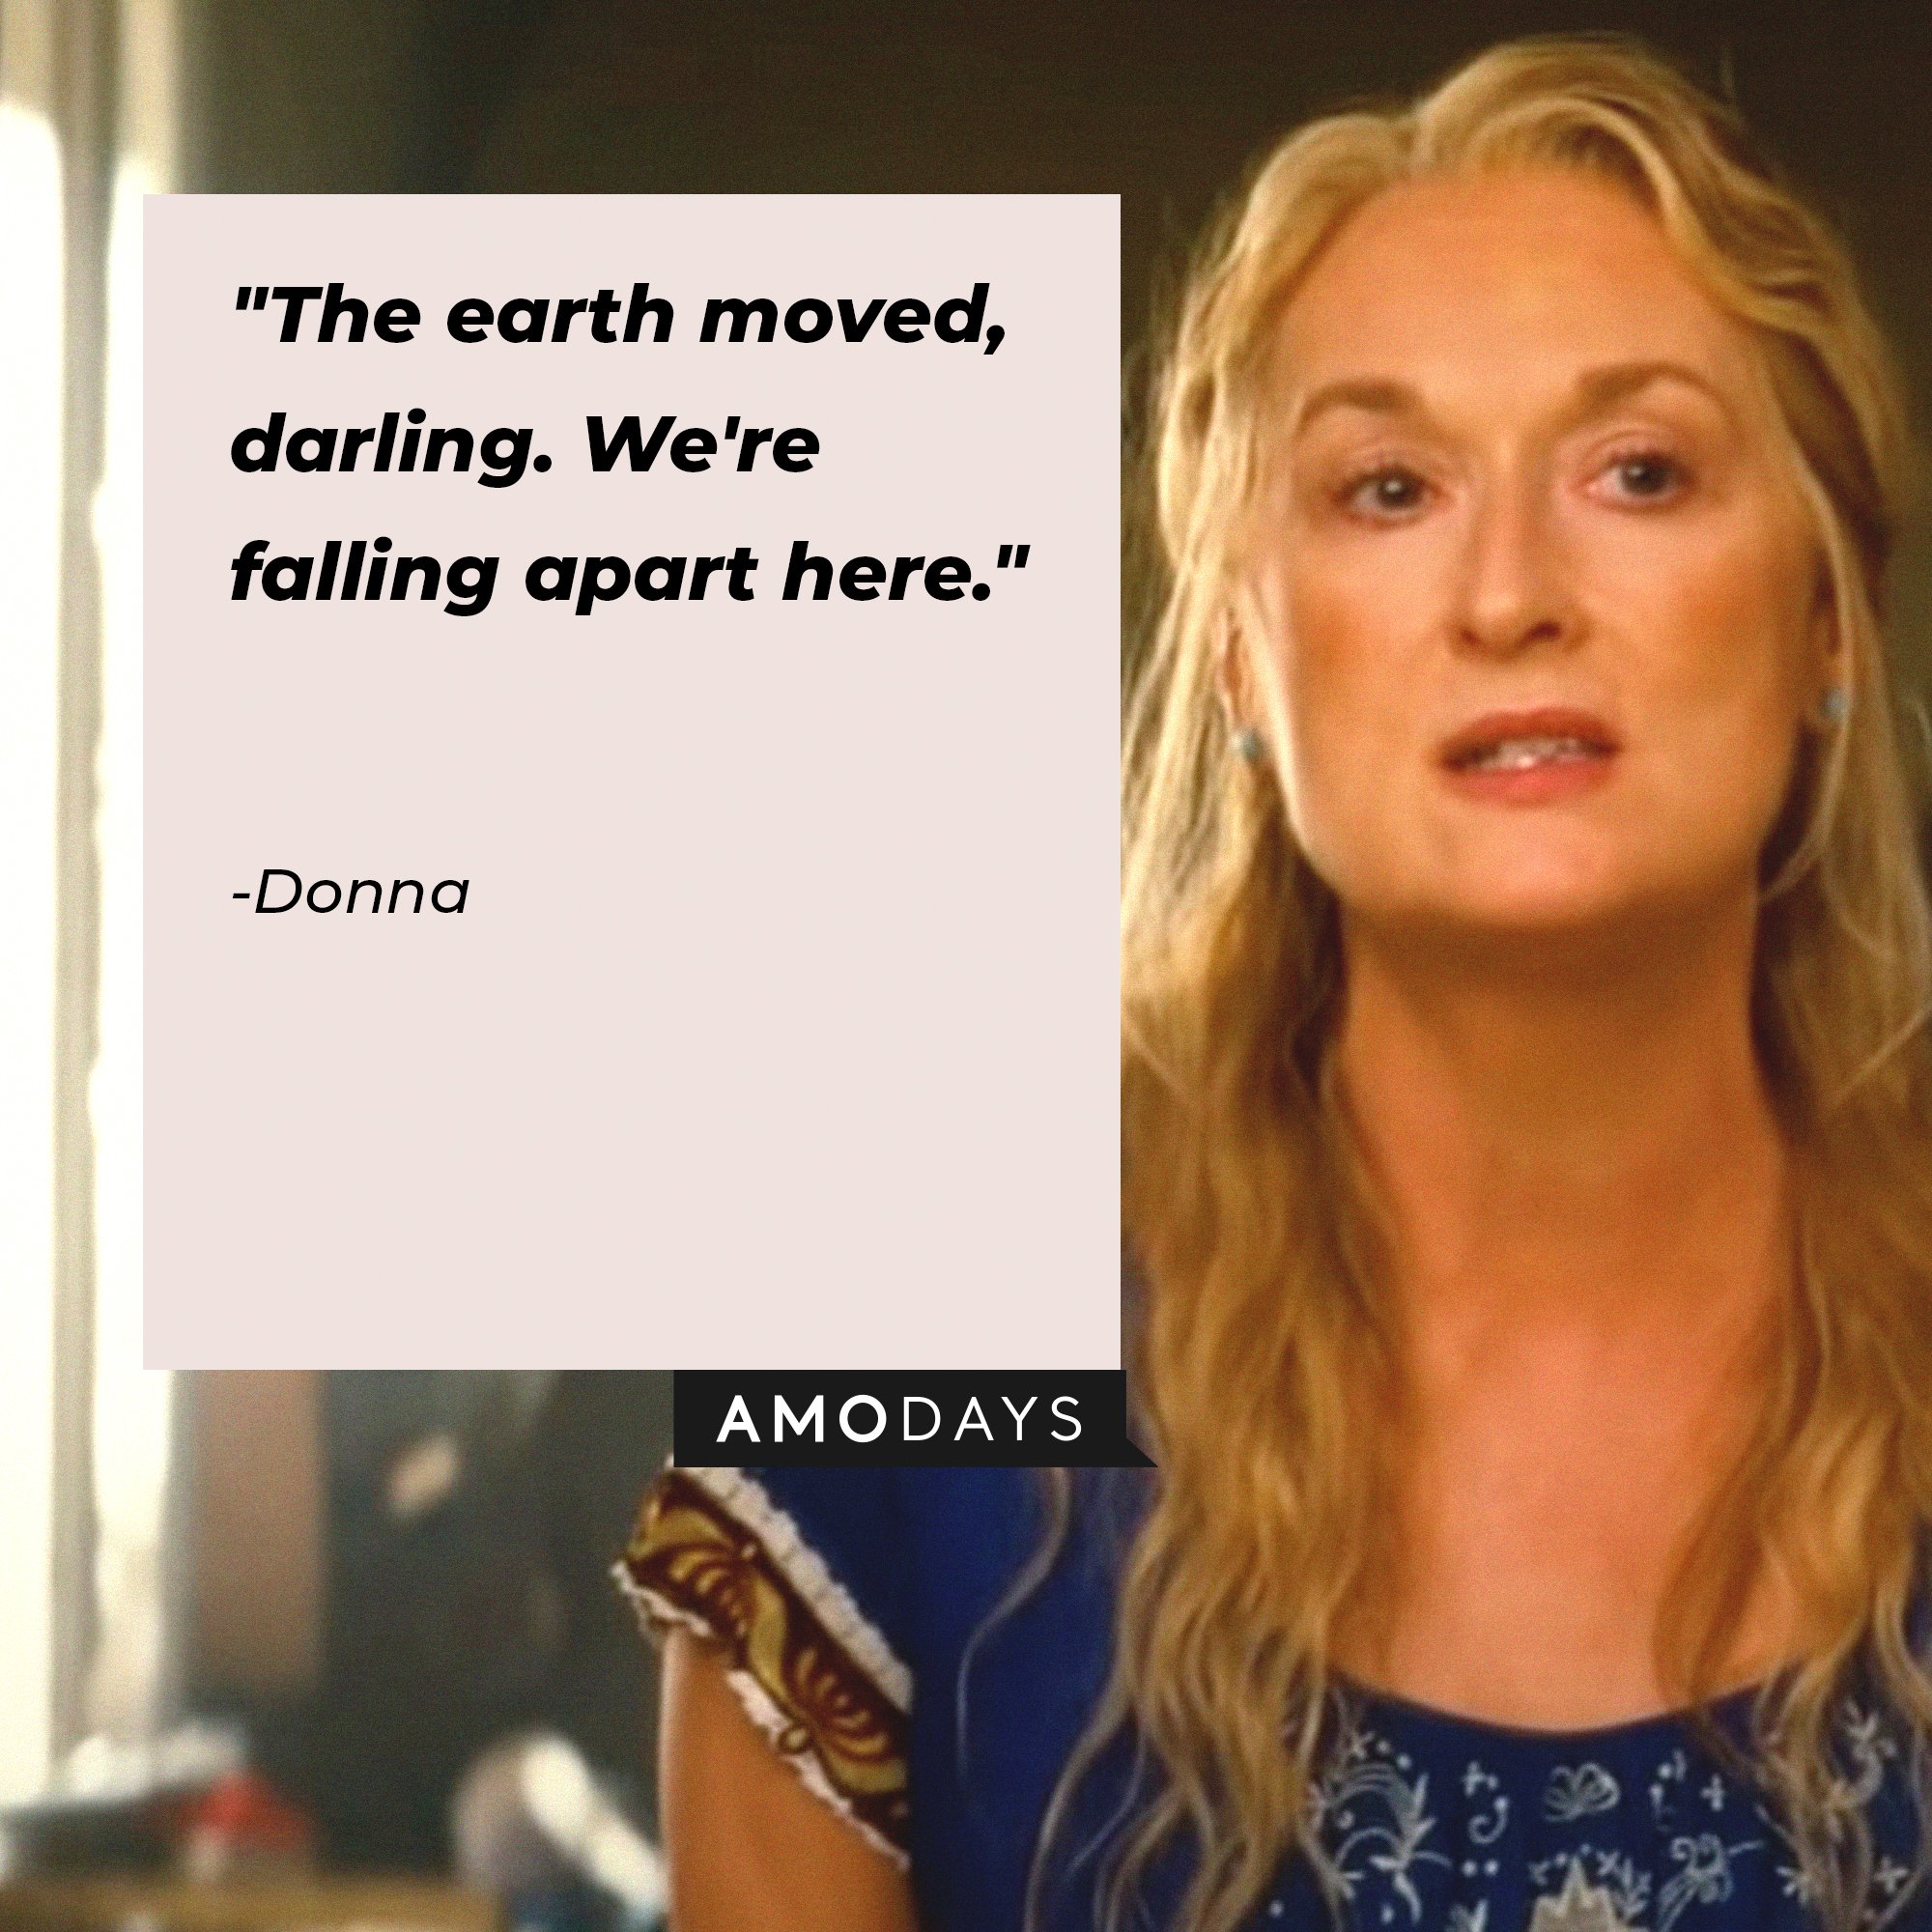 Donna's quote: "The earth moved, darling. We're falling apart here." | Image: AmoDays